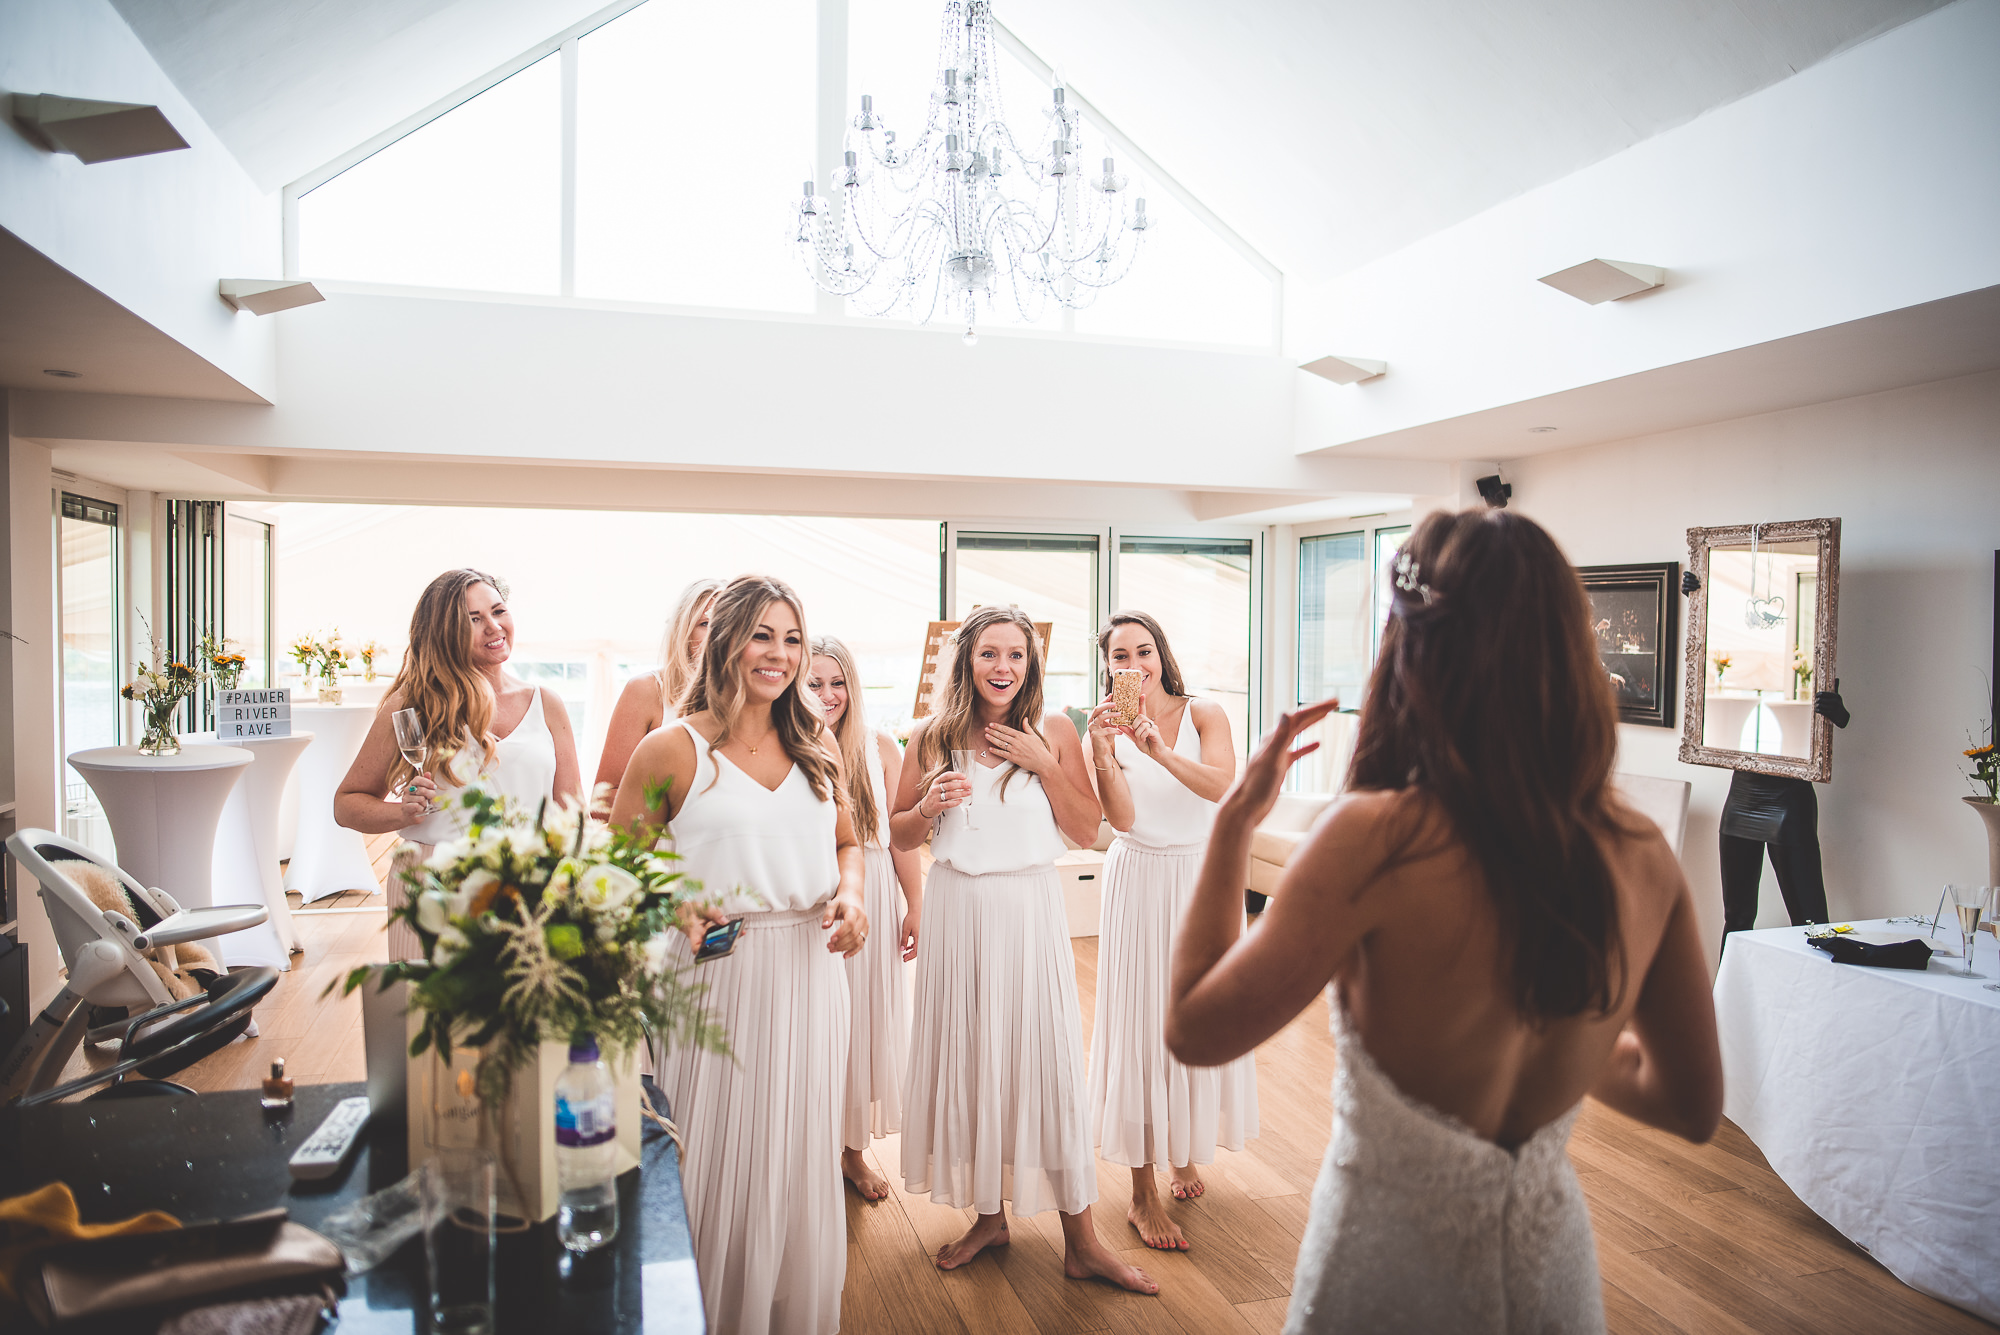 A bride and her bridesmaids, captured by a wedding photographer, stand elegantly in front of a grand chandelier.